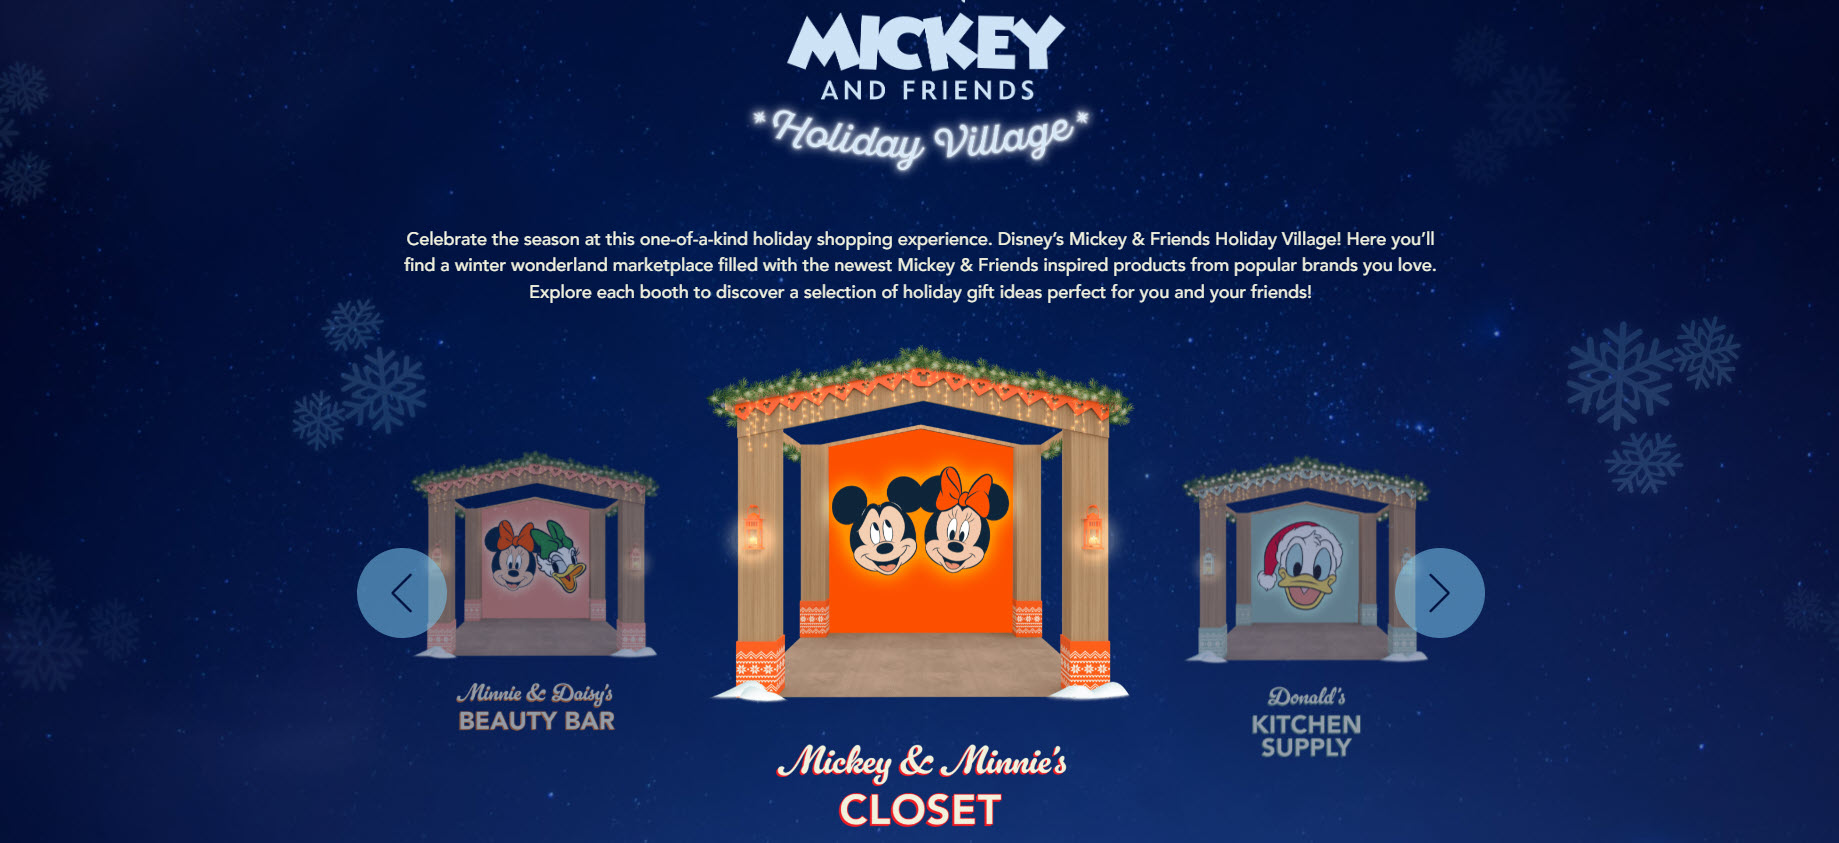 Gift Your Favorite Mickey & Friends Products at Digital 